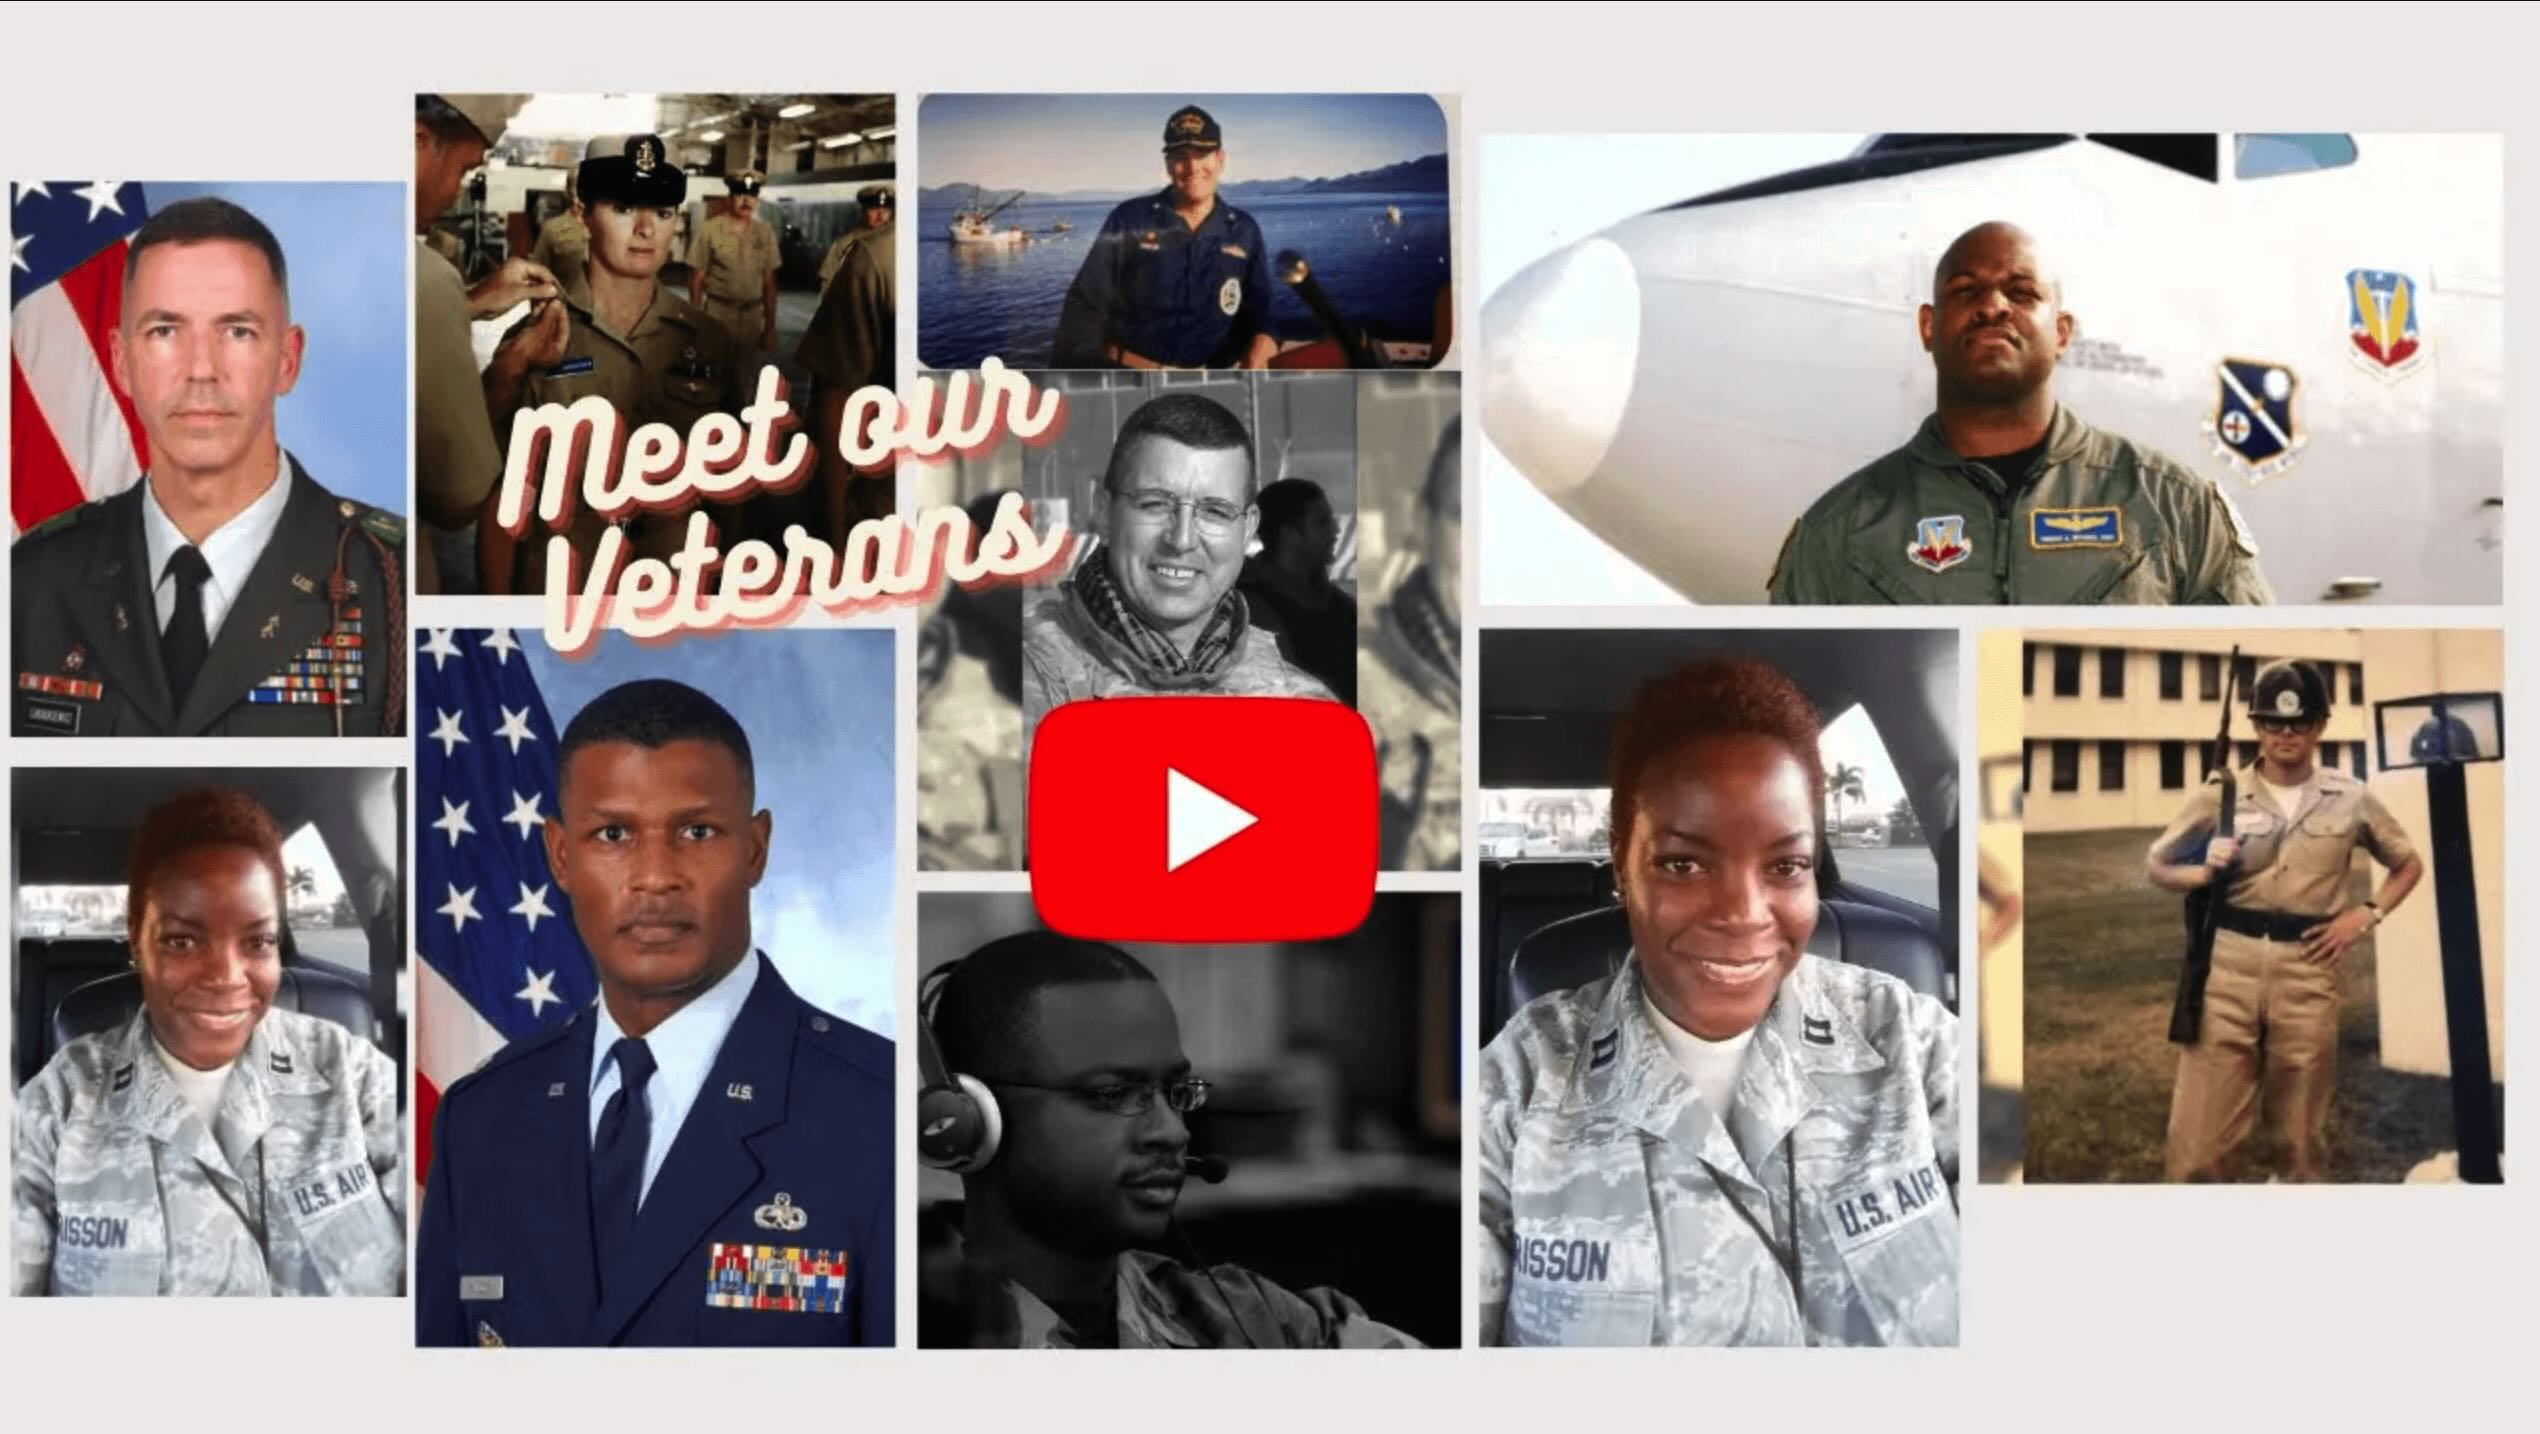 Collage of eight diverse U.S. military veterans with a central "meet our veterans" text, featuring a YouTube play button overlay.